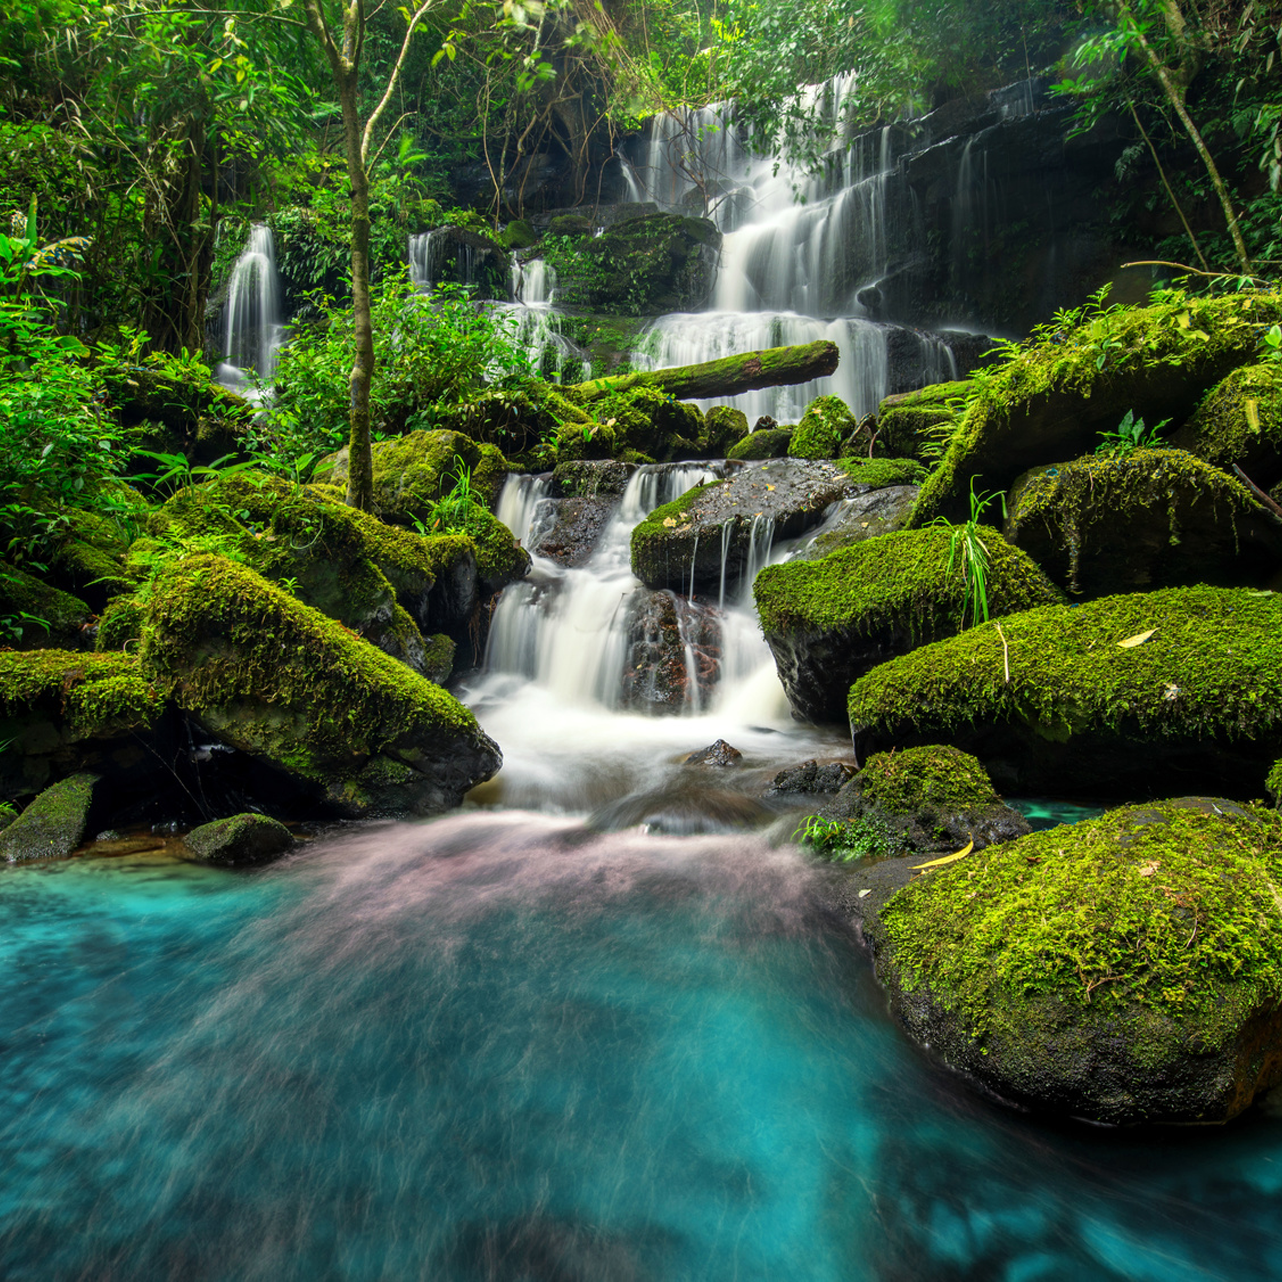 Waterfalls in lush forest setting